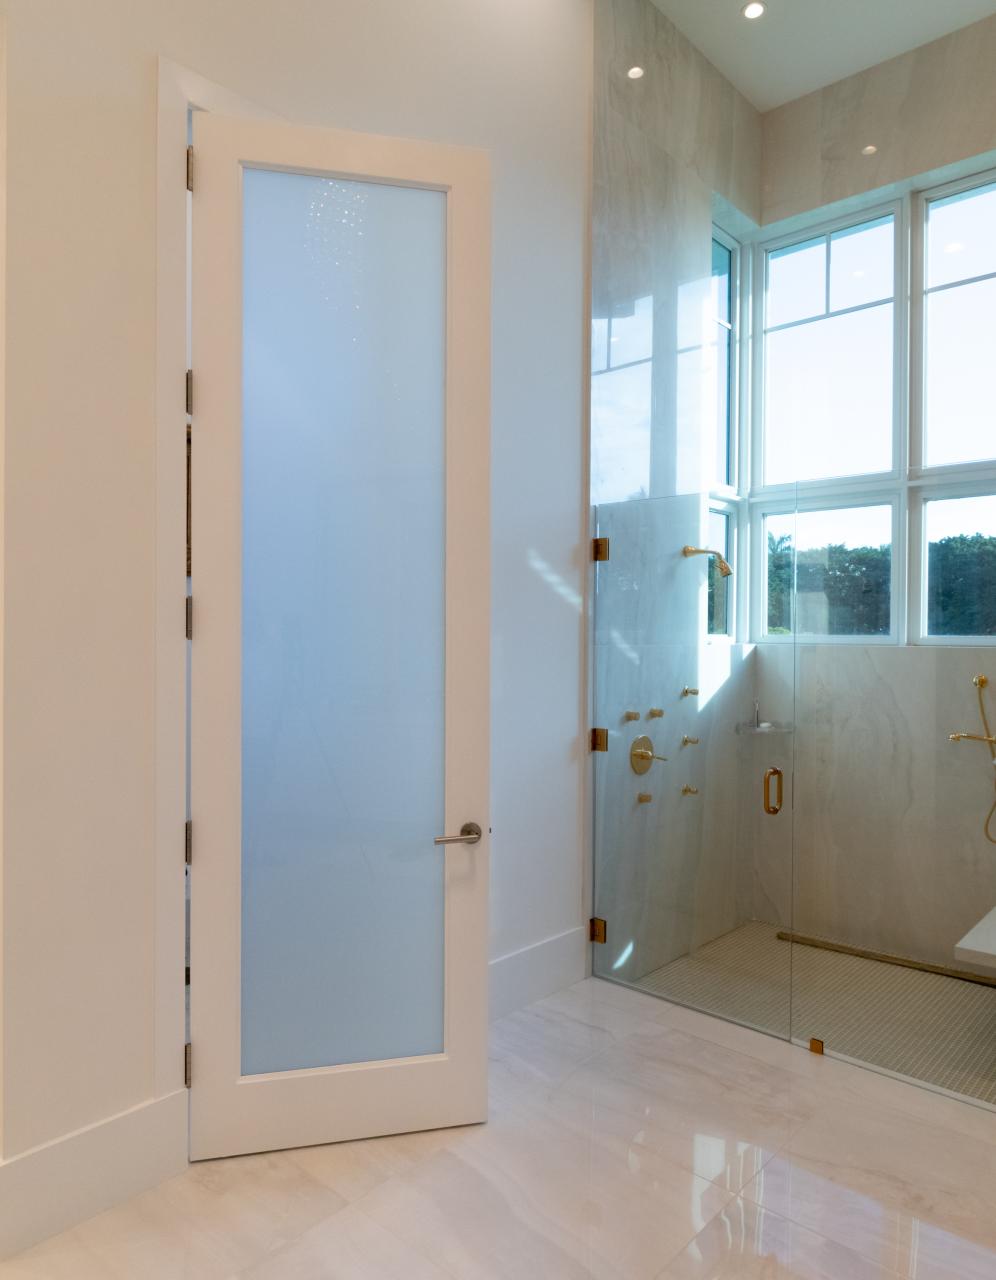 This master bath features 10' tall TS1000 door in MDF with One Step sticking and White Lami glass